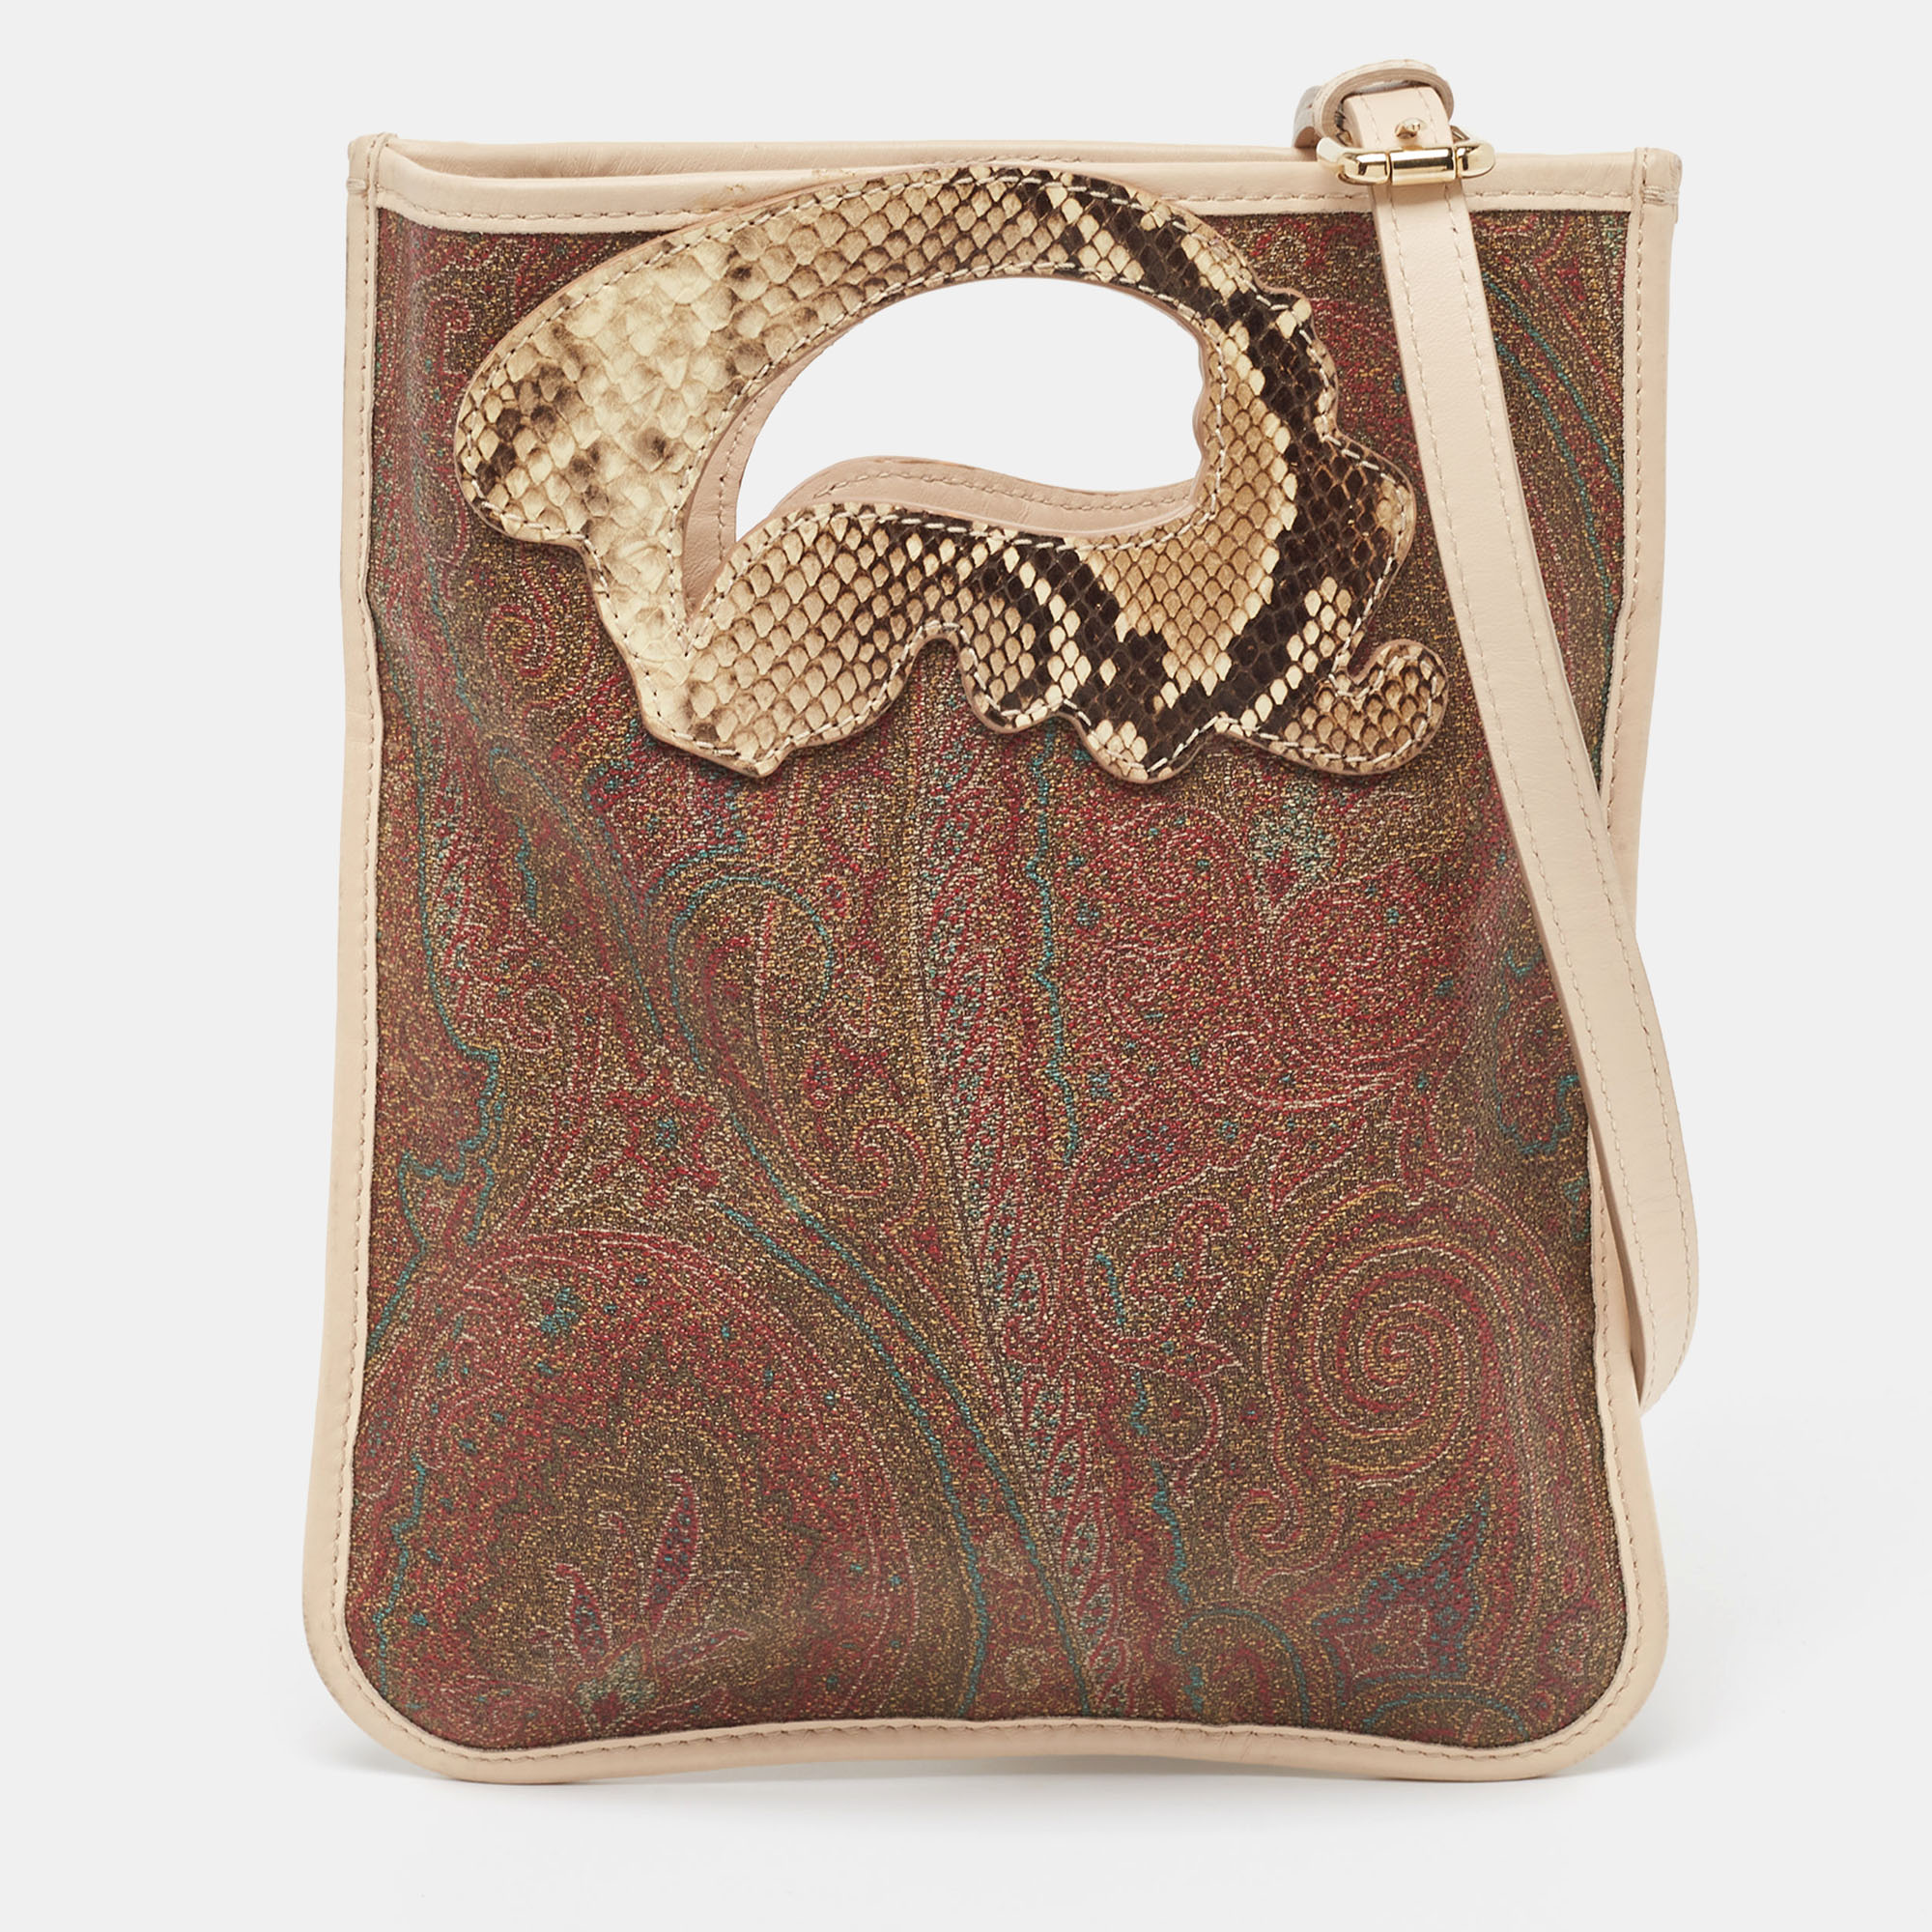 A beautiful and stylish bag to wear through the day or dress up for the day parties this Etro crossbody bag can fit your basic essentials with ease. Crafted in brown paisley printed coated canvas this bag is accented with beige leather trimming and adjustable long strap along.